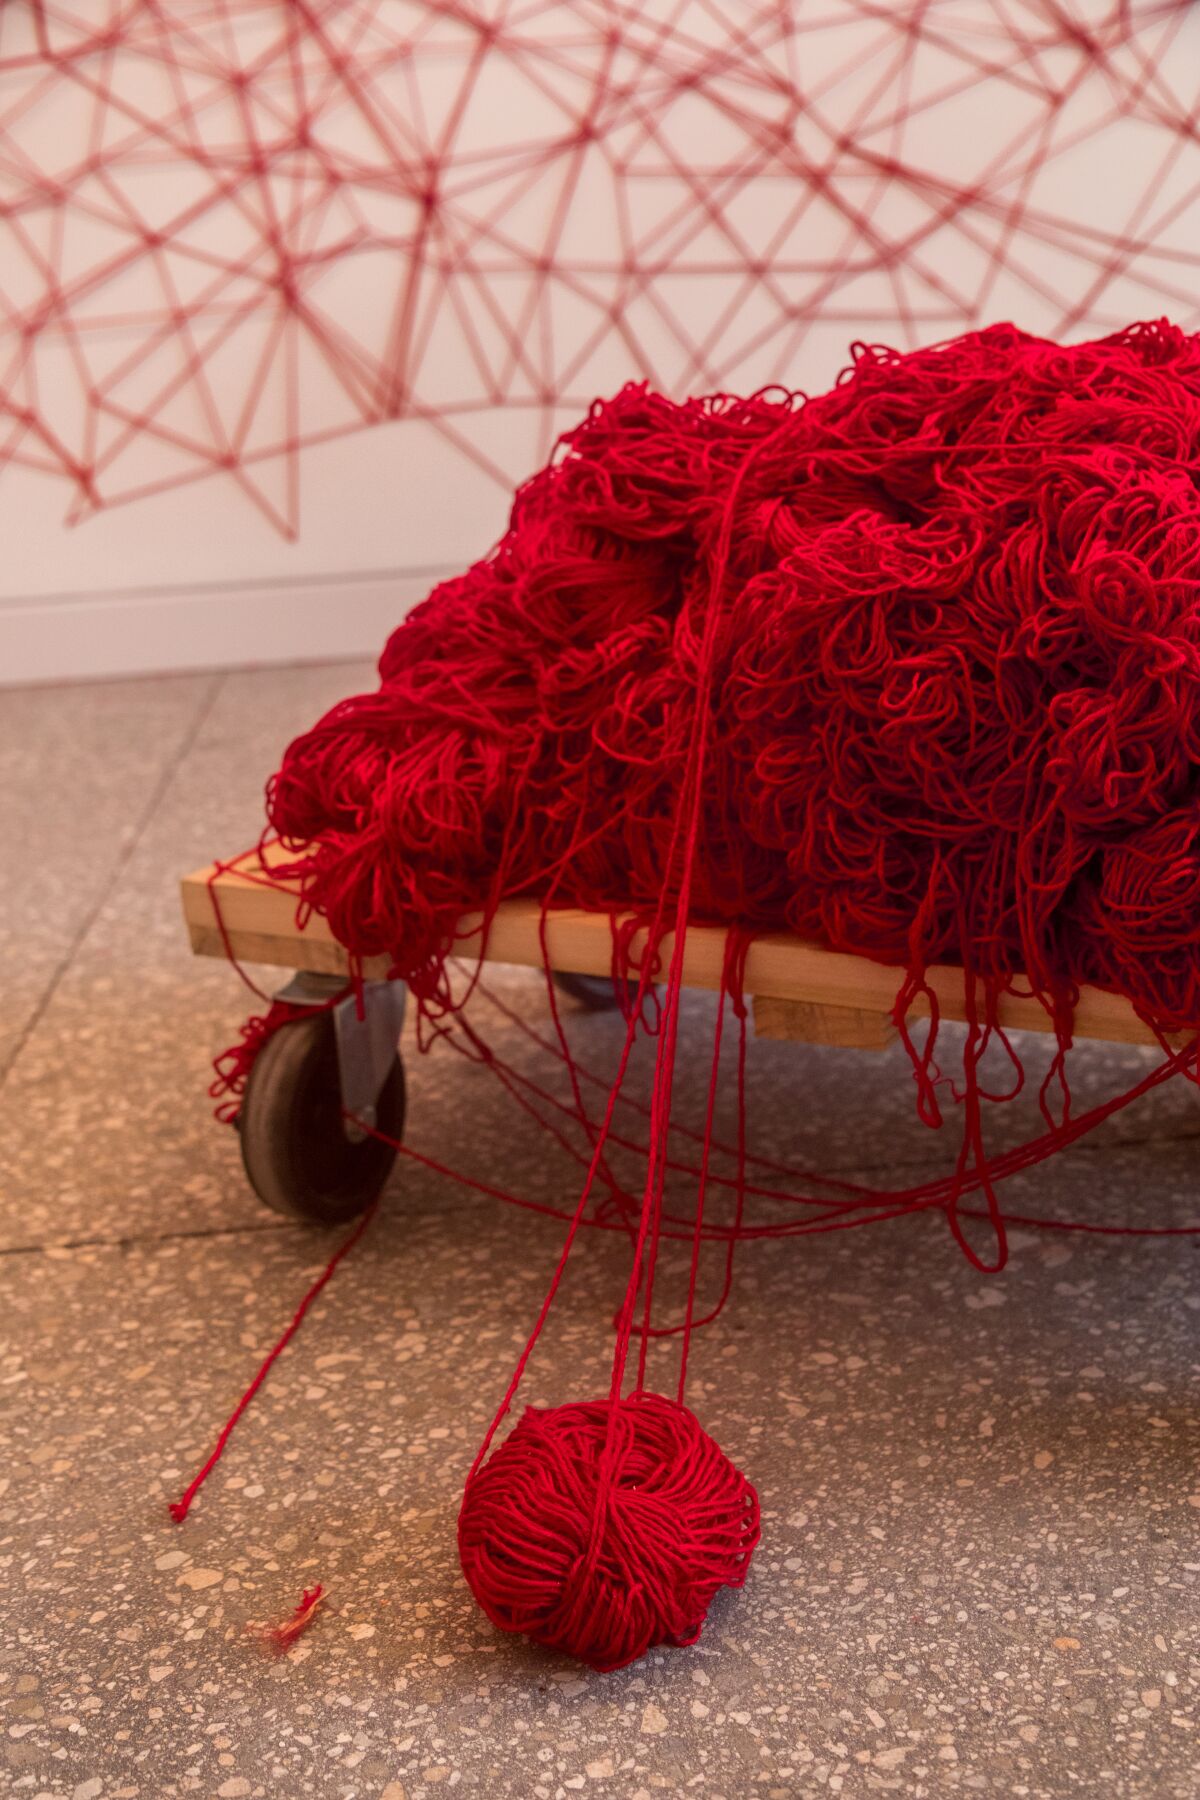 Yarn used by artist Chiharu Shiota for her large-scale installation, "The Network."